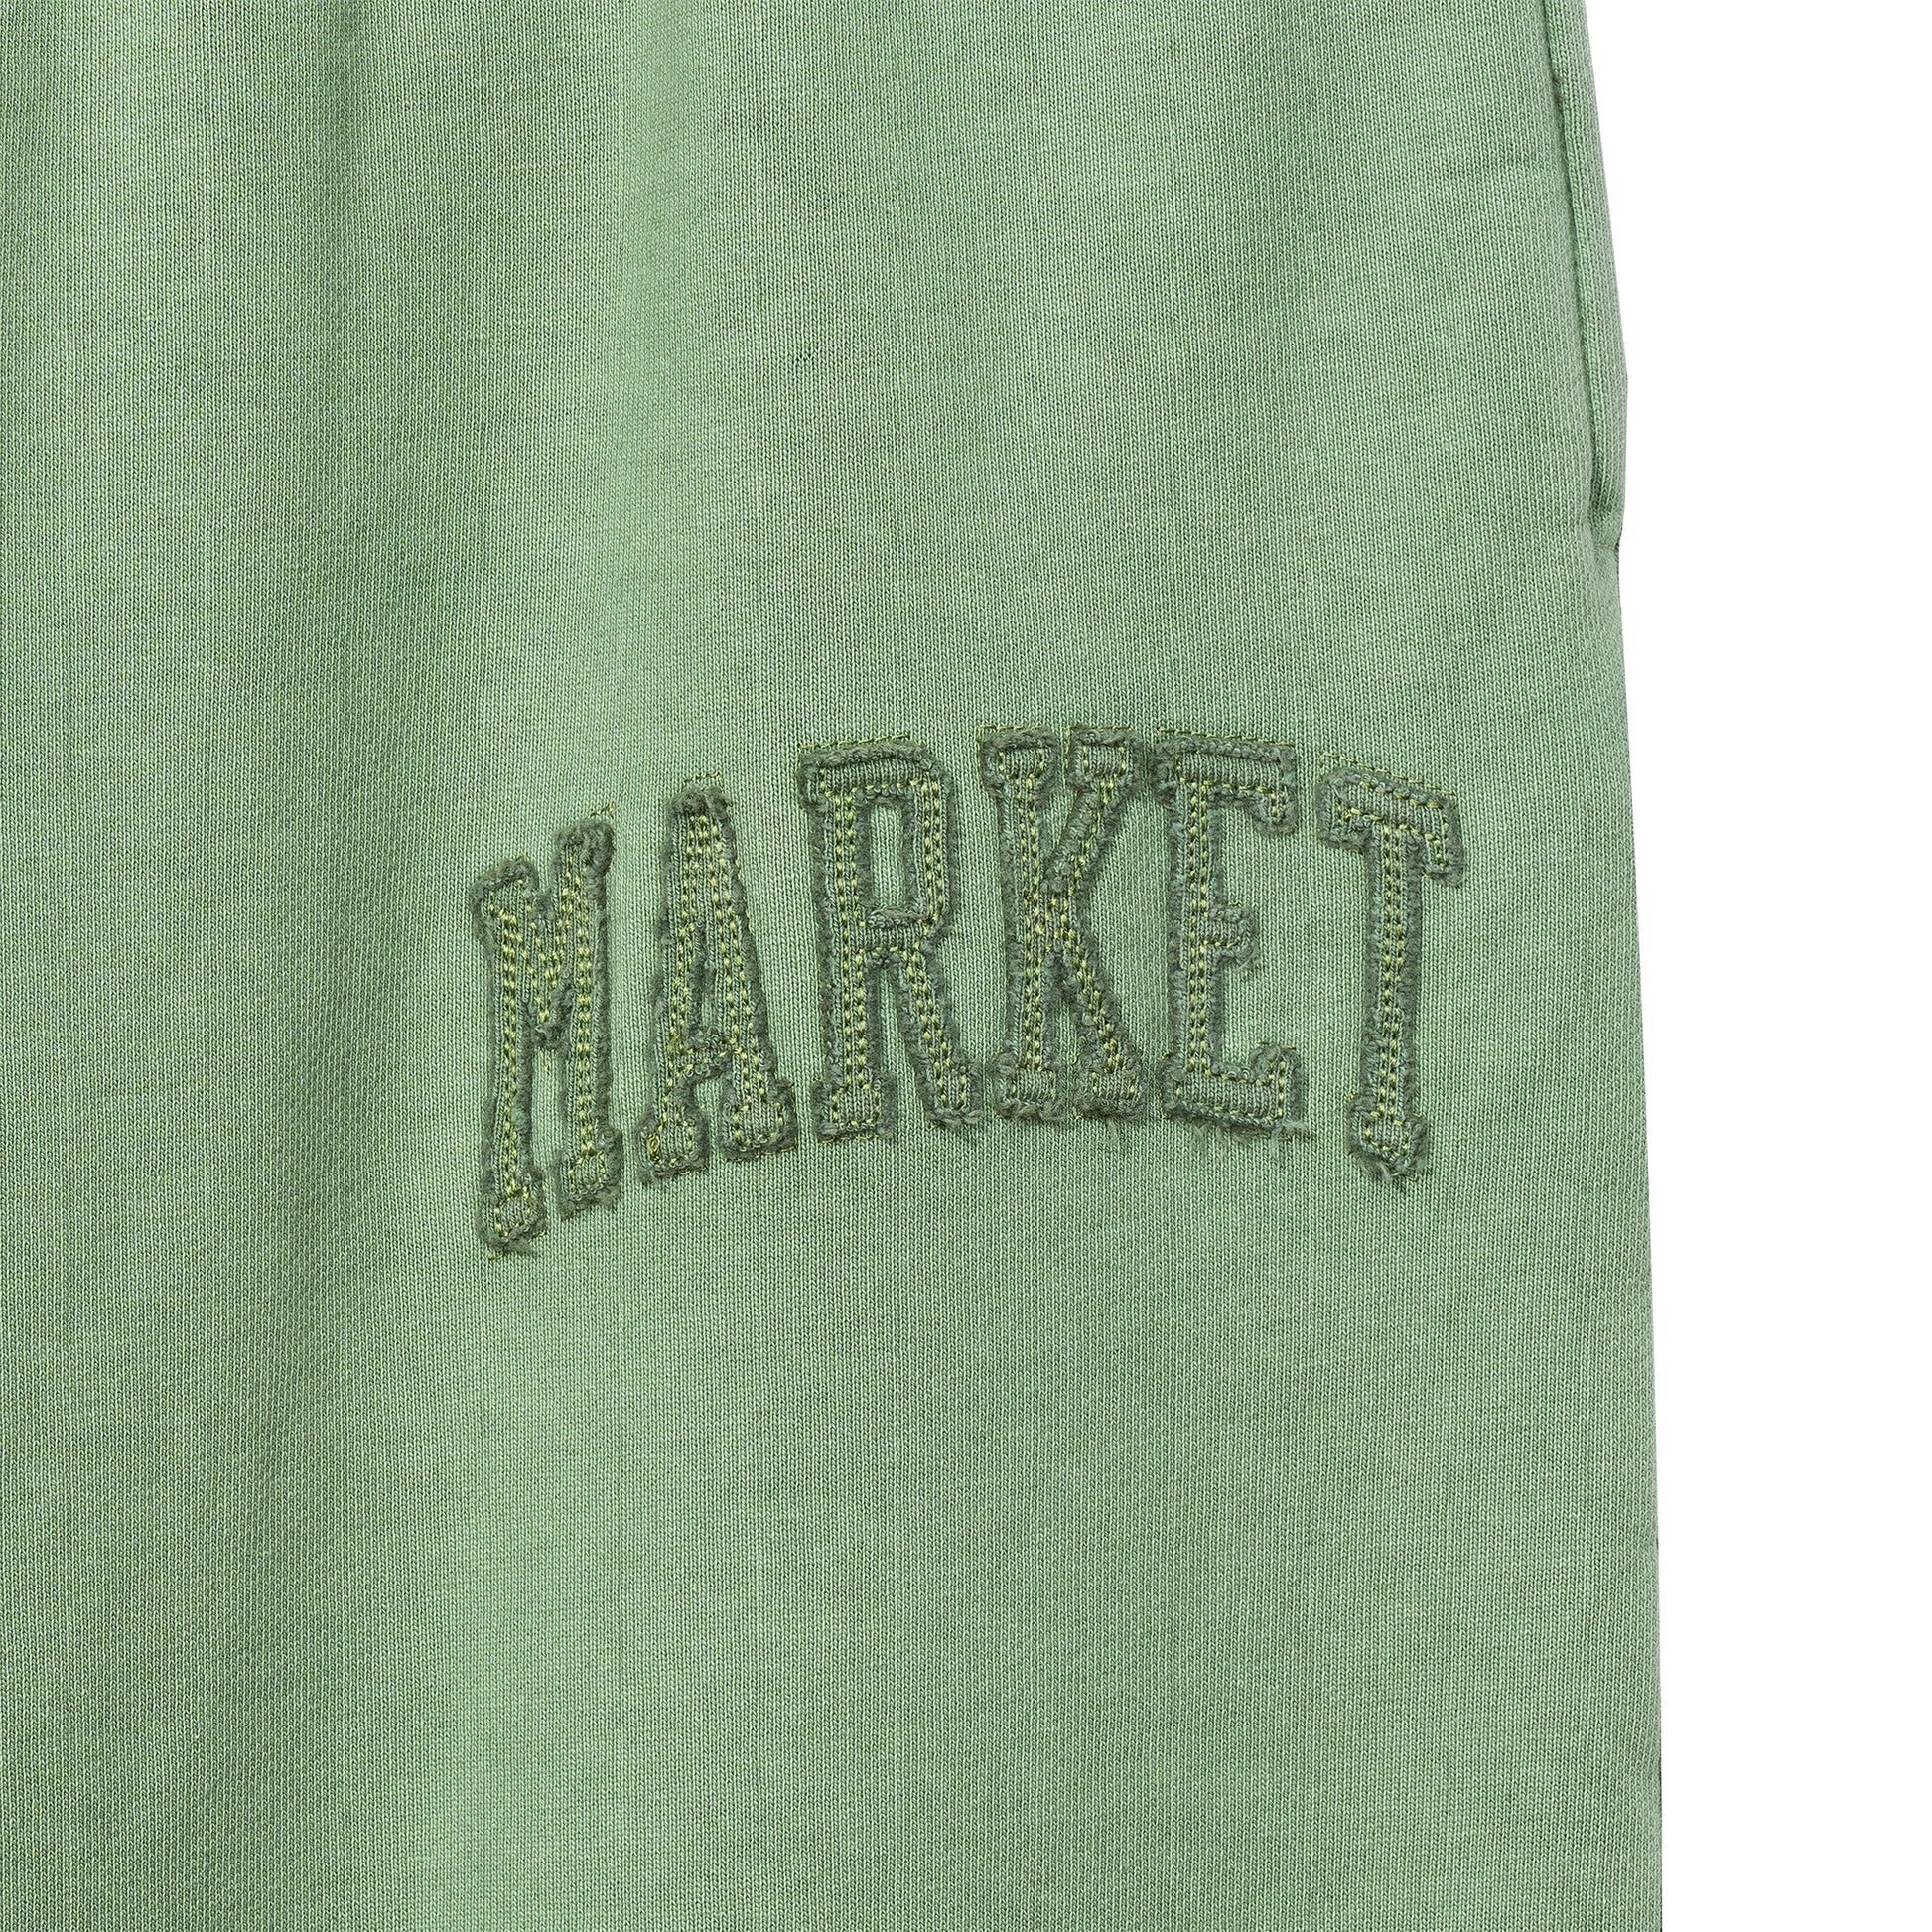 MARKET clothing brand VINTAGE WASH ARC SWEATPANTS. Find more graphic tees, sweatpants, shorts and more bottoms at MarketStudios.com. Formally Chinatown Market. 